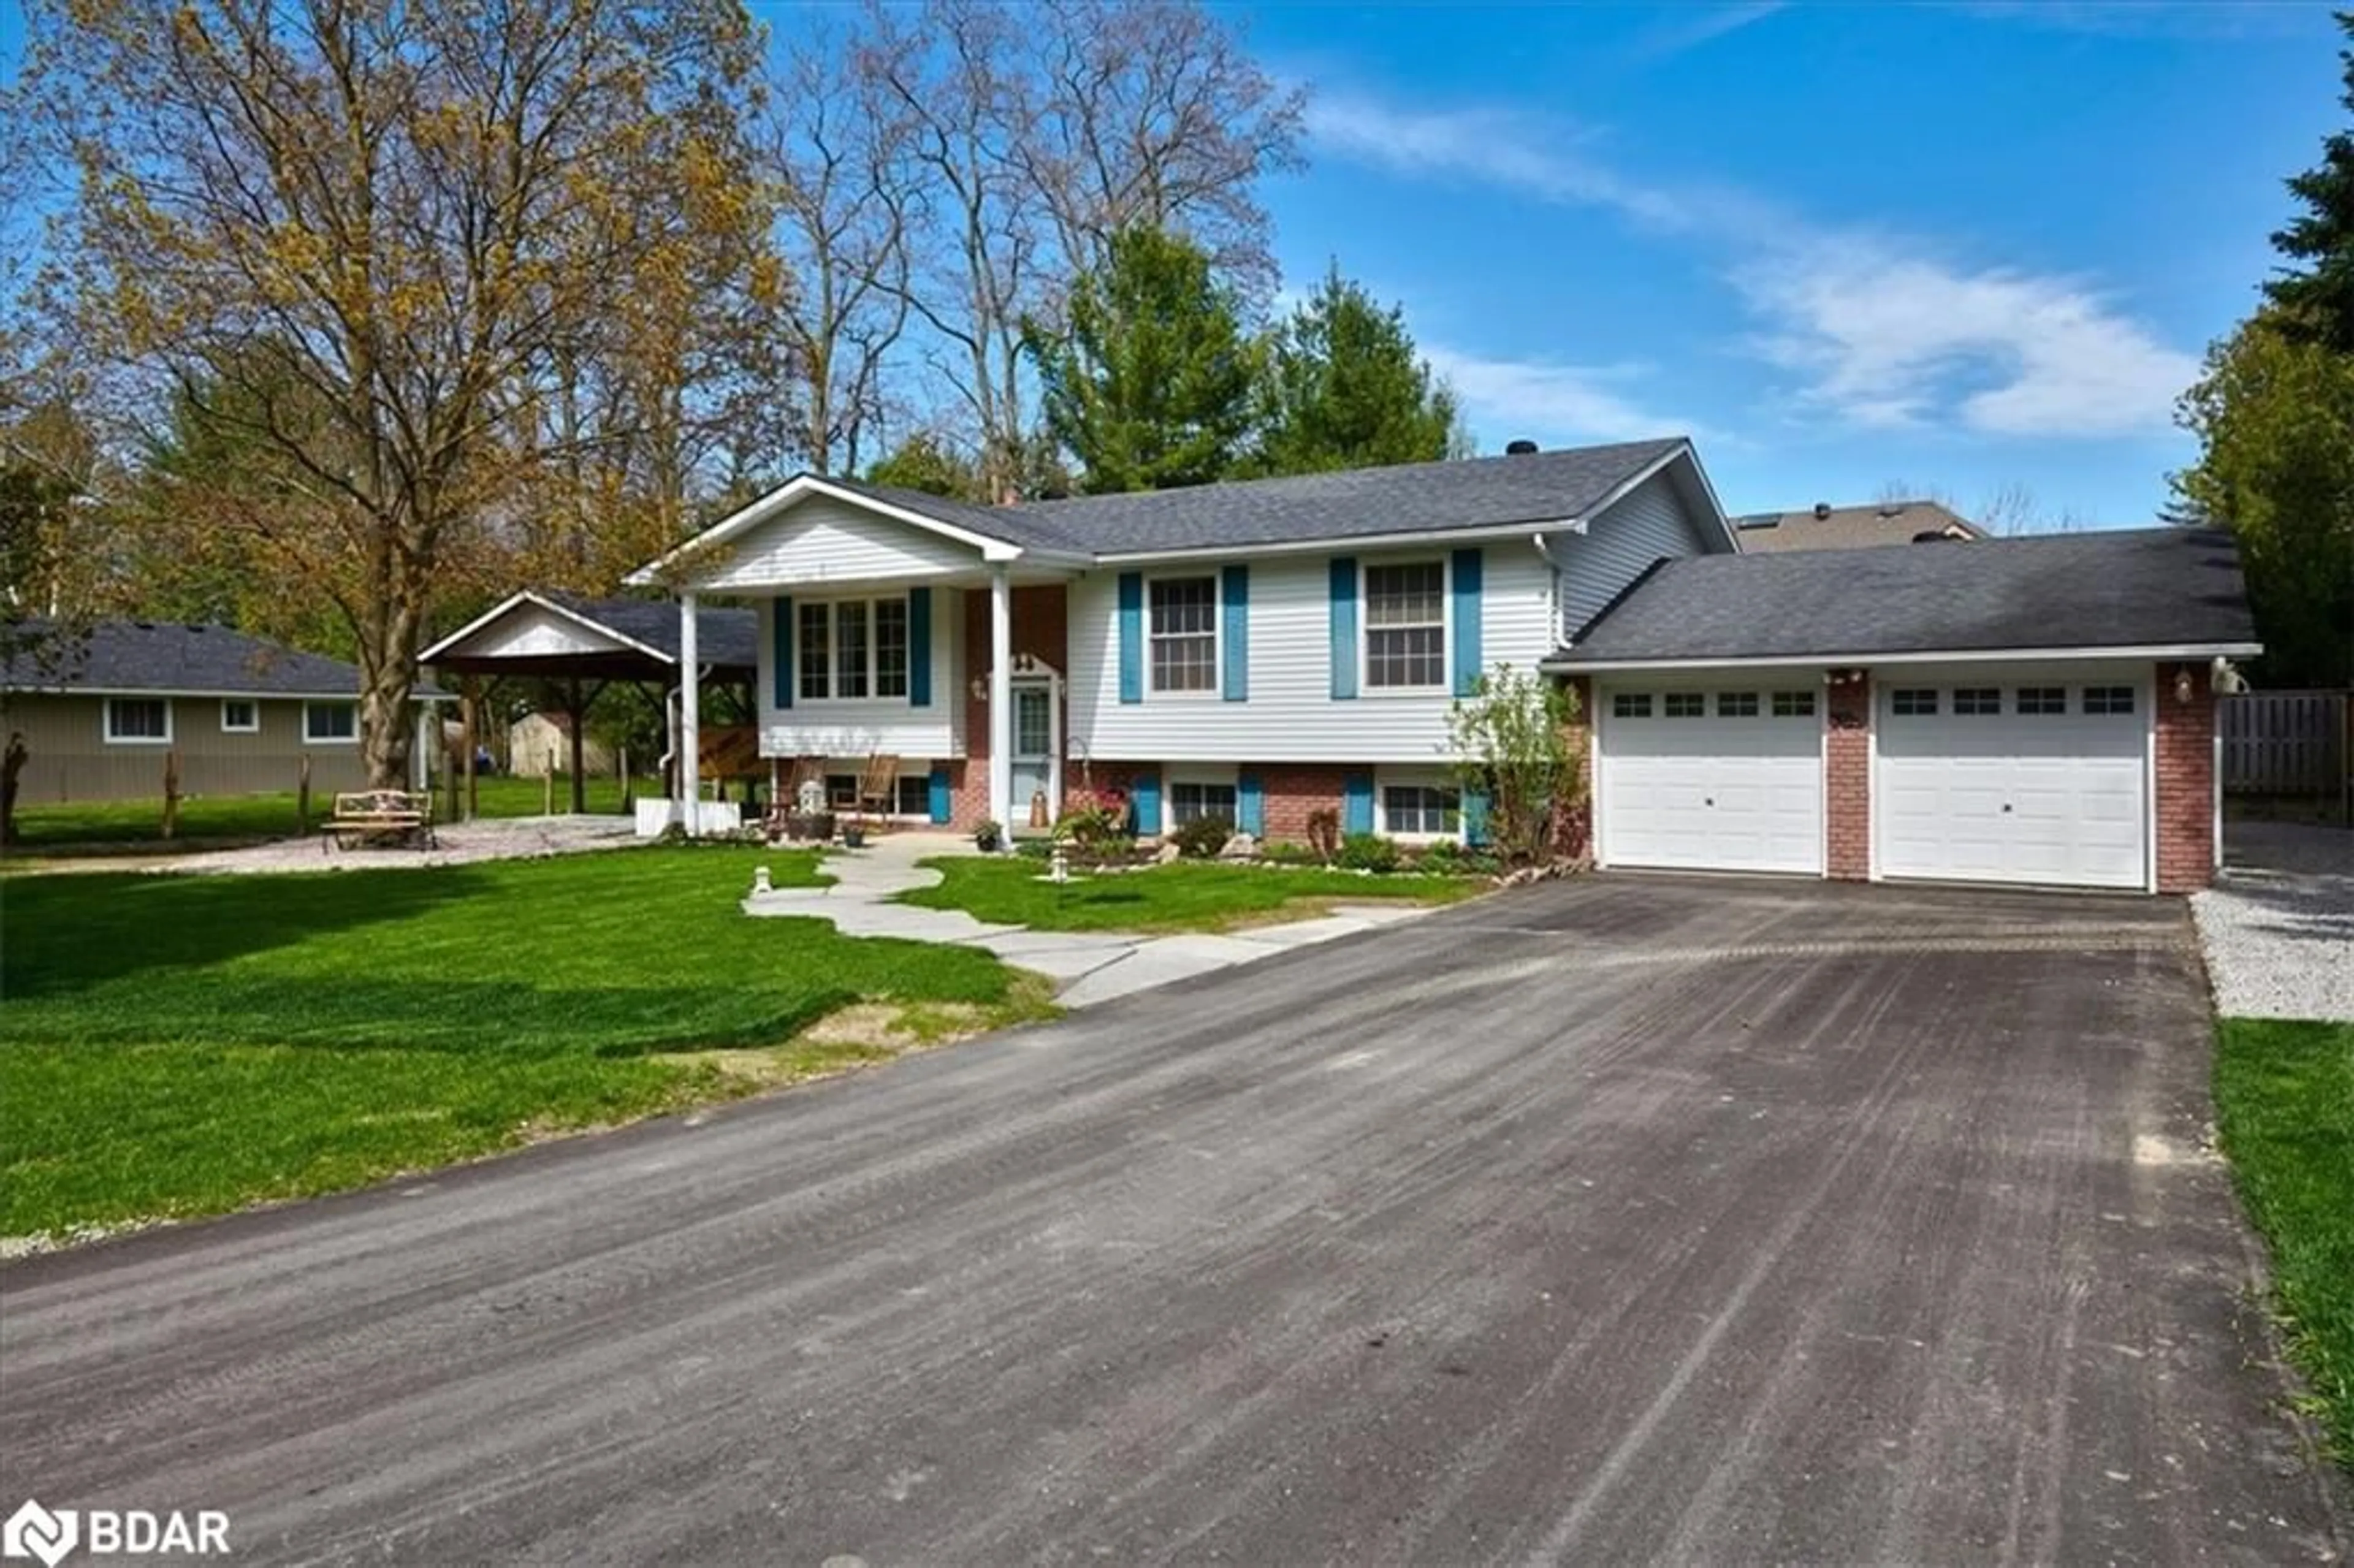 Frontside or backside of a home for 3929 Rosemary Lane, Innisfil Ontario L9S 2L6